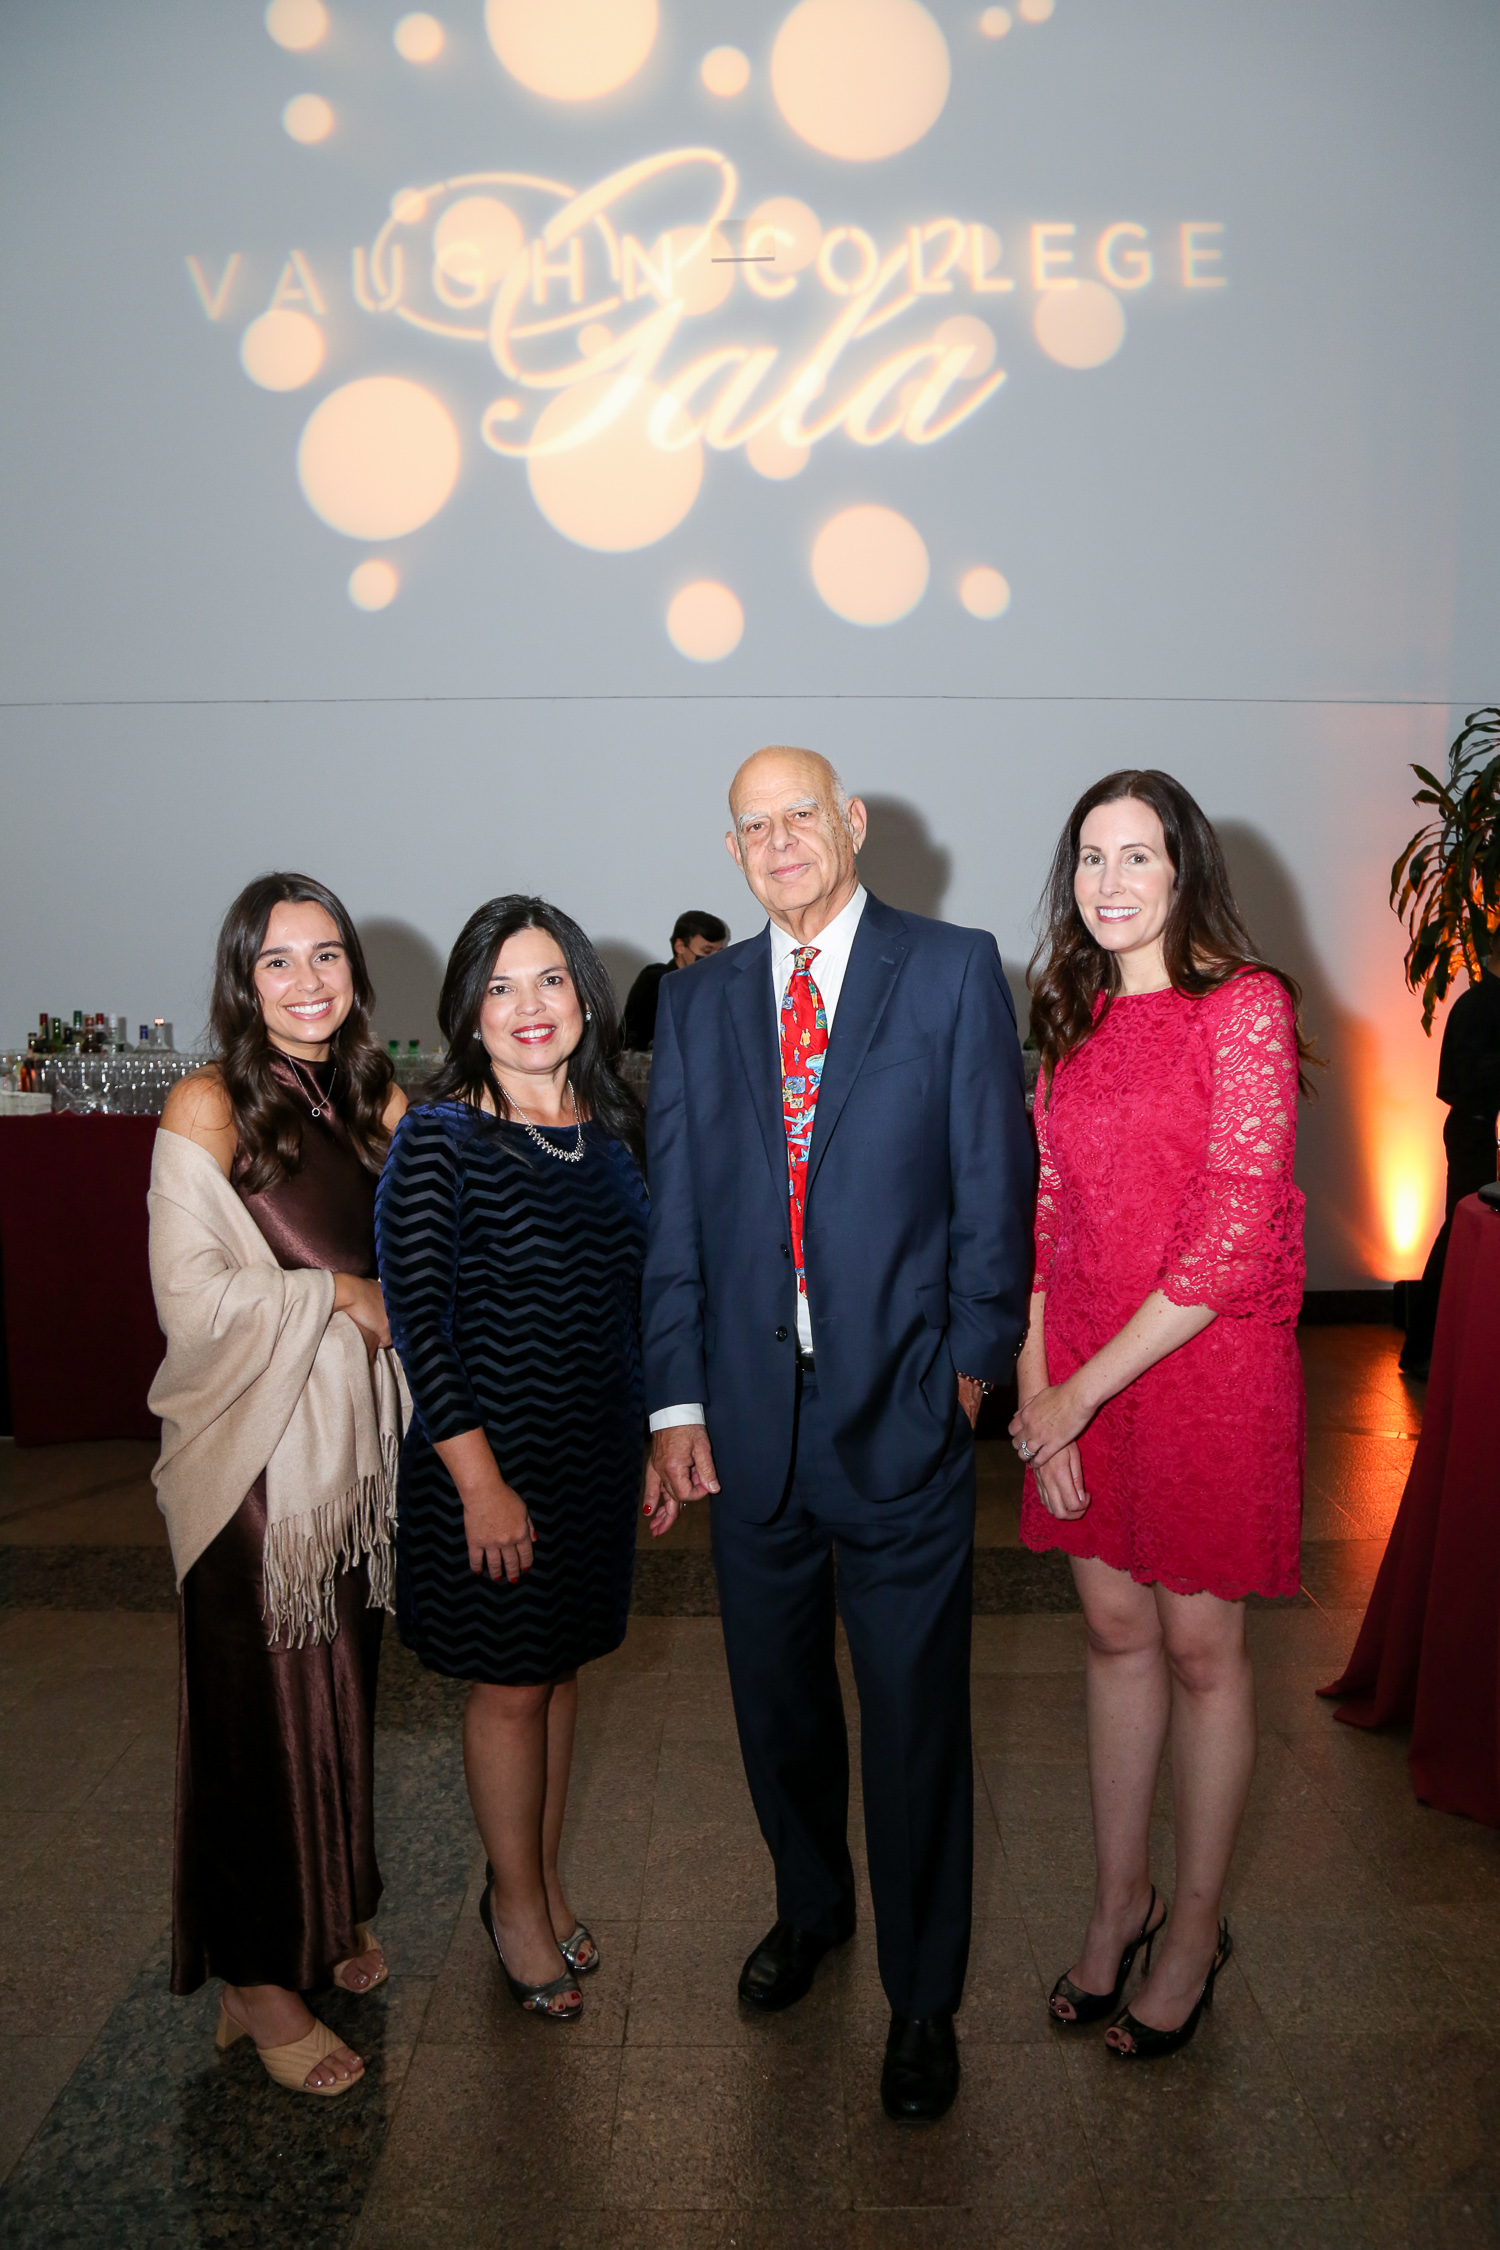 Stephen A. Alterman with the Cargo Airline Association team.   (L-R) Lauren Hyland, Yvette A. Rose, Stephen Alterman and Gina R. Zuckerman.